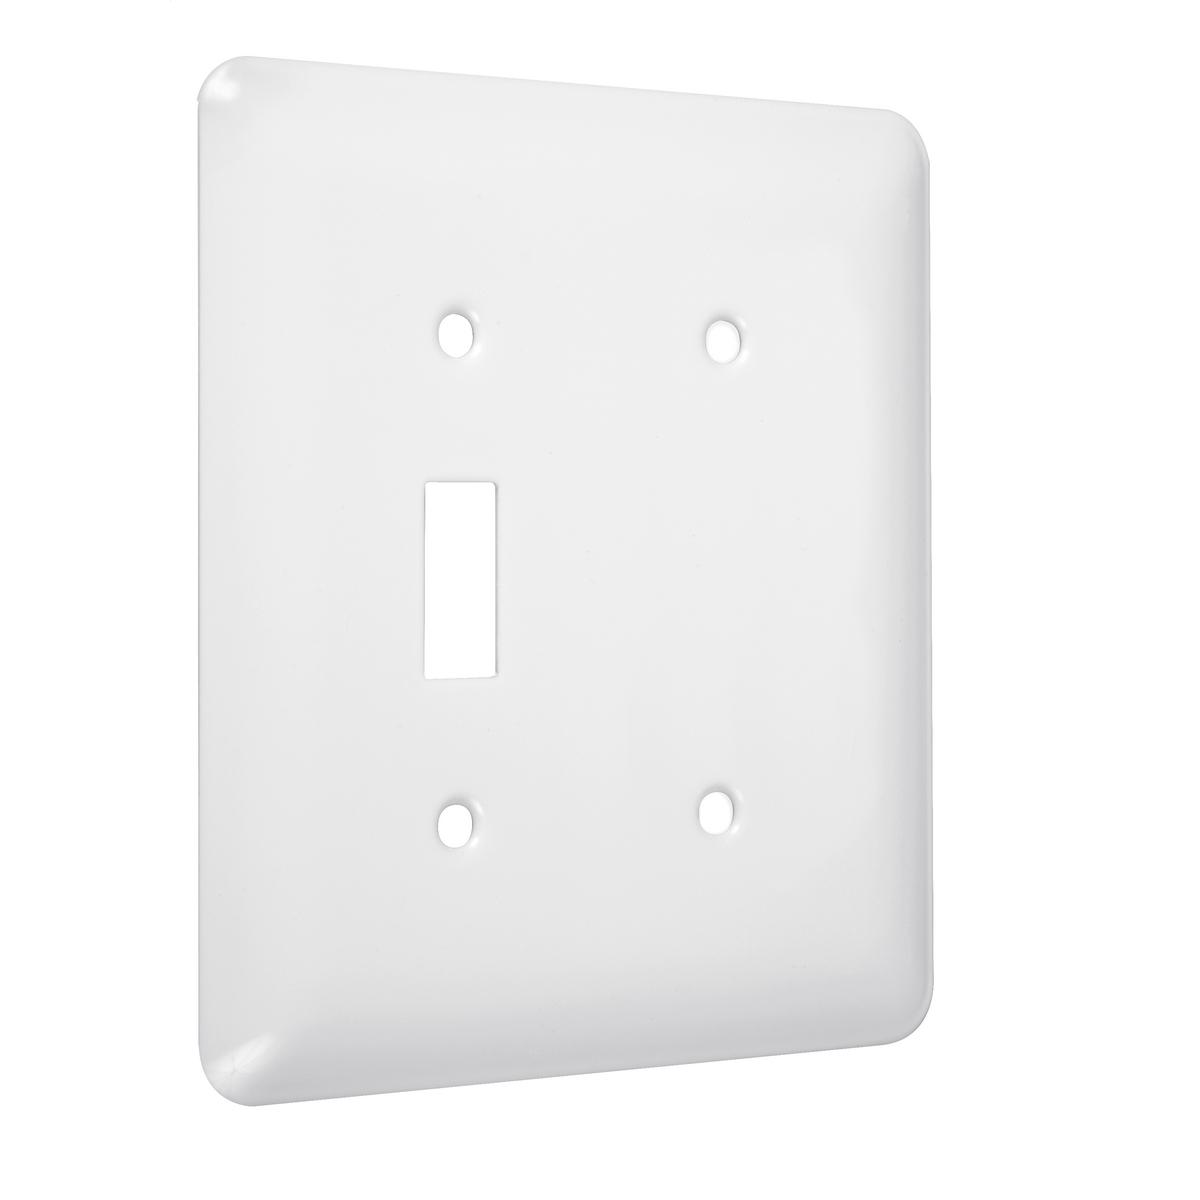 Hubbell WRW-TB 2-Gang Metal Wallplate, Maxi, Toggle/Blank, White Smooth  ; Easily primed and painted to match or complement walls. ; Won't bow, crack or distort during installation. ; Premium North American powder coat. ; Includes screw(s) in matching finish.